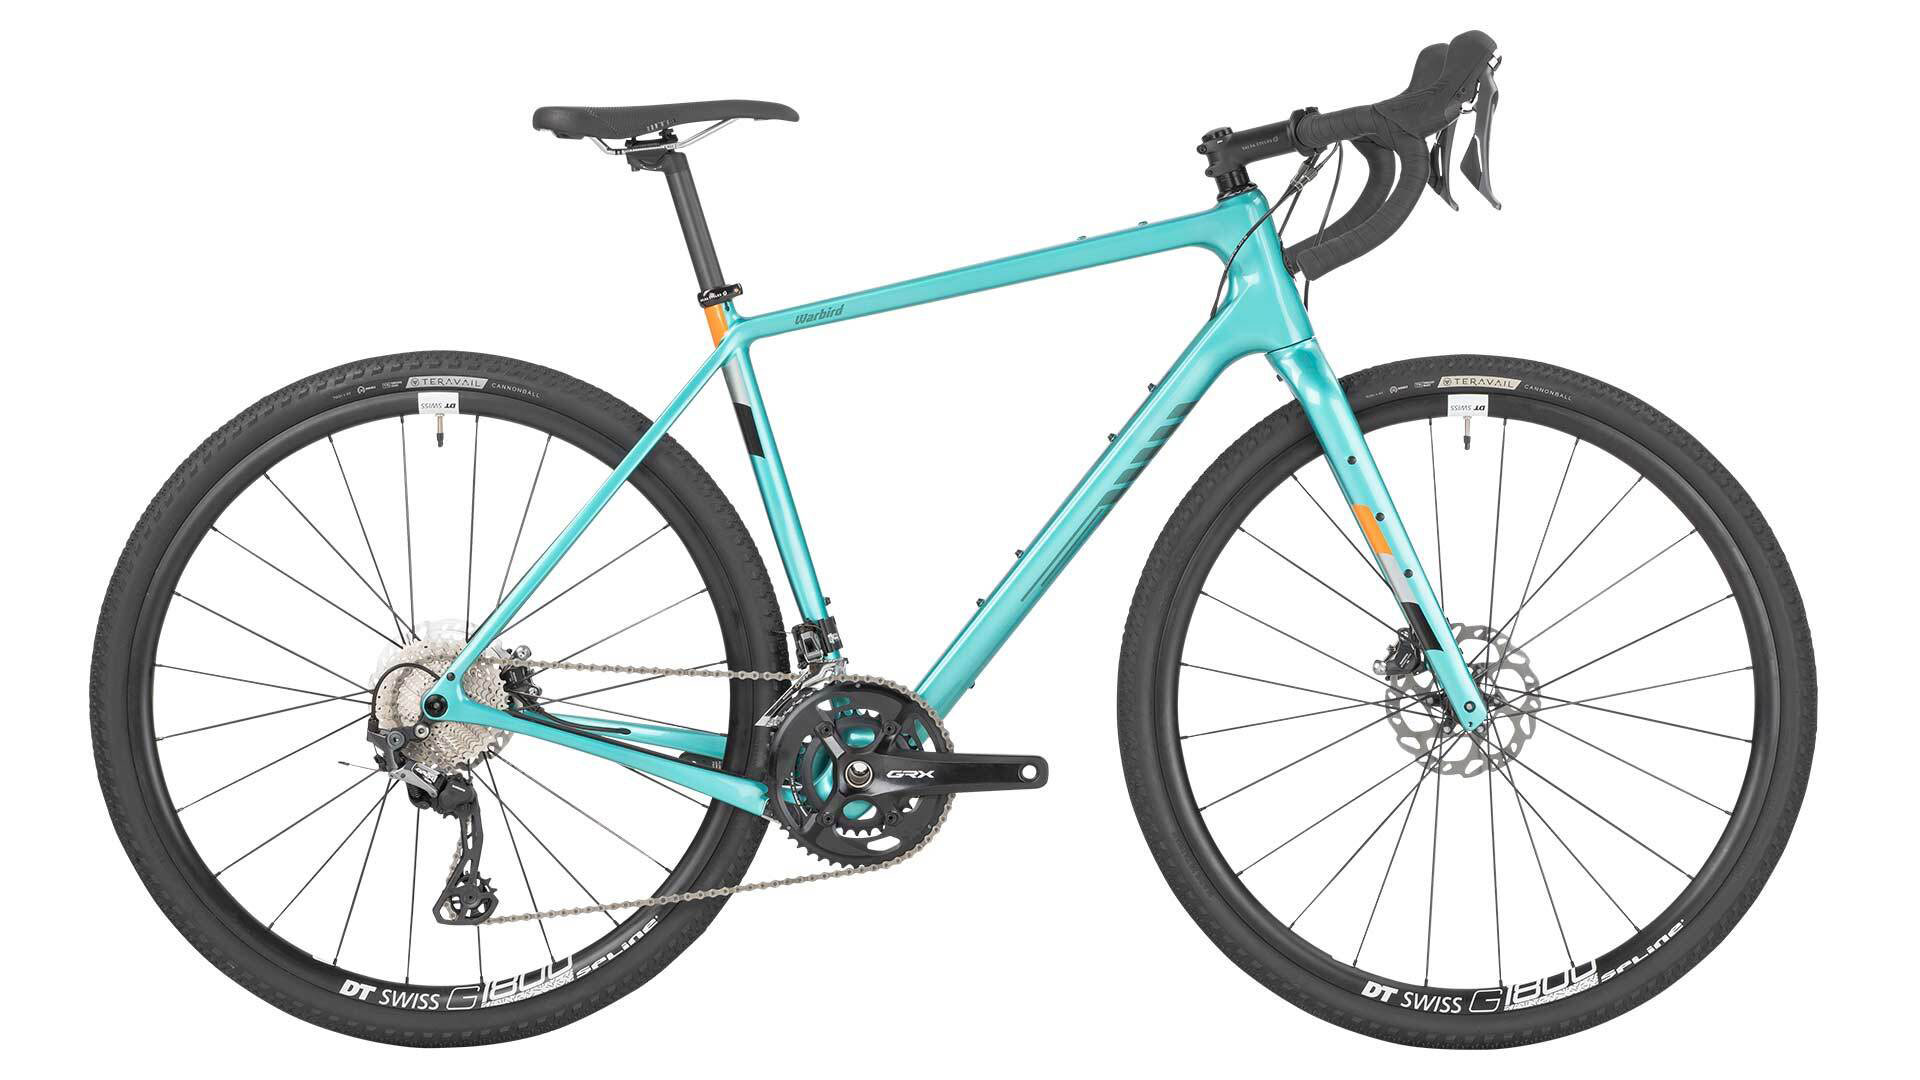 Salsa Warbird Carbon GRX 810 Turquoise Turquoise